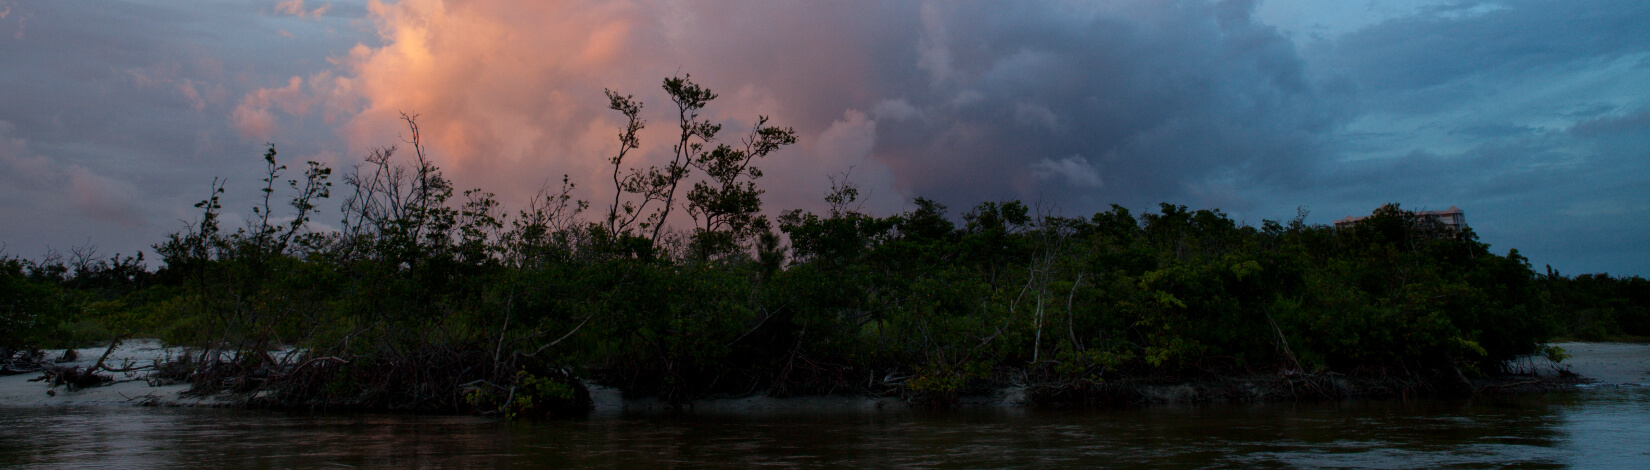 A storm cloud photographed at sunset over a coastal mangrove in Naples, Florida